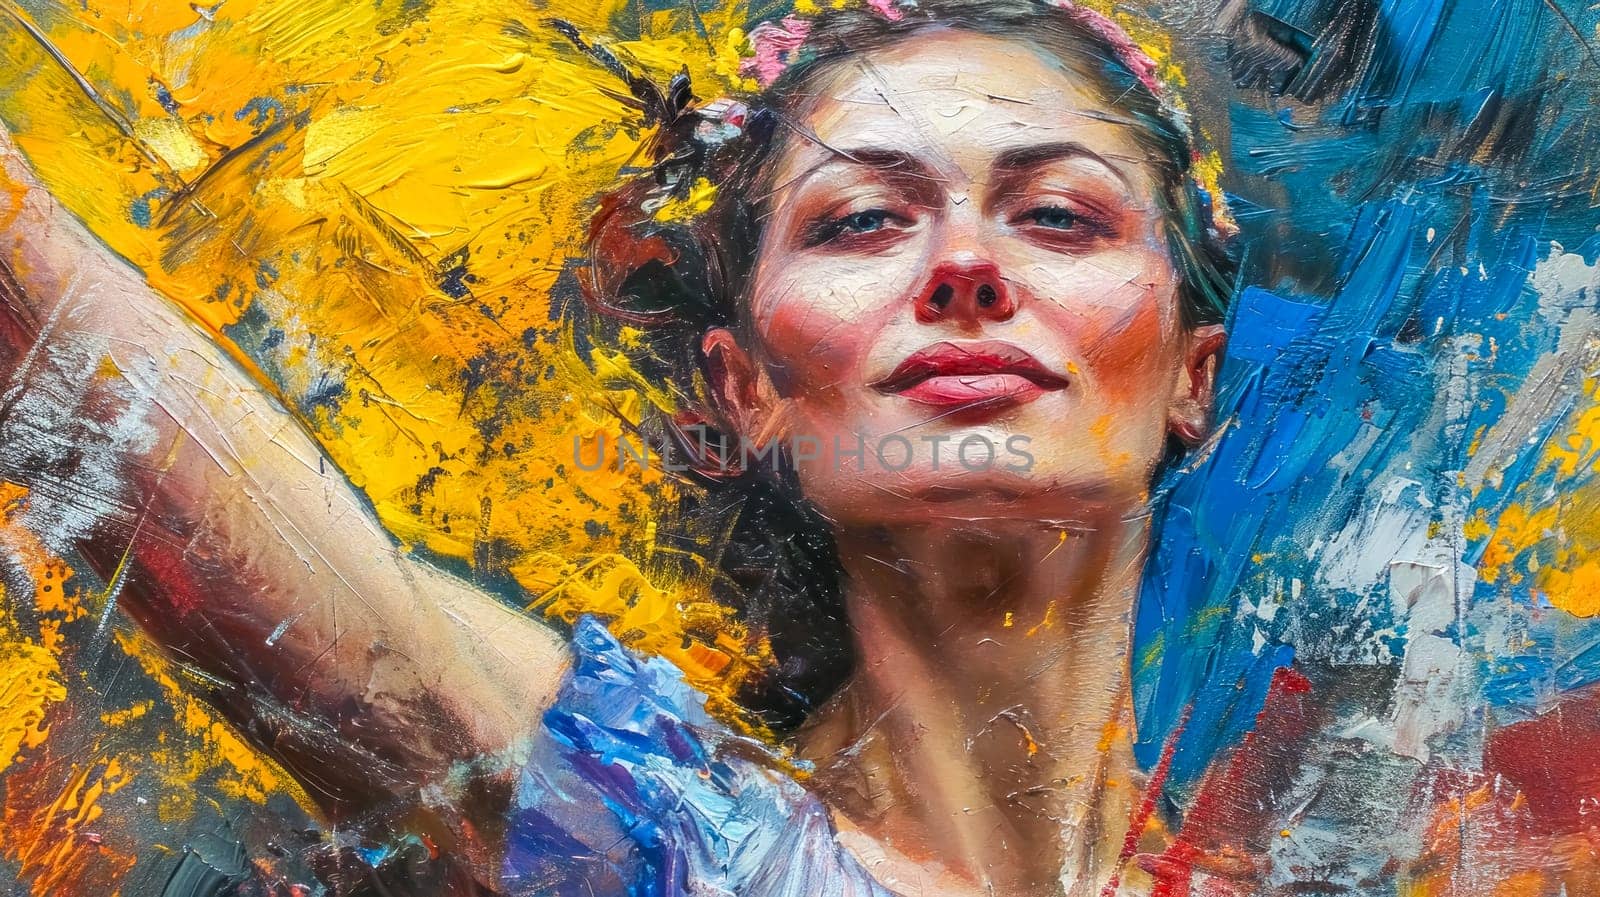 portrait of a woman gazing upwards, her pose suggesting hope or aspiration, set against a backdrop of peeling yellow and blue paint, possibly symbolizing the Ukrainian flag. by Edophoto